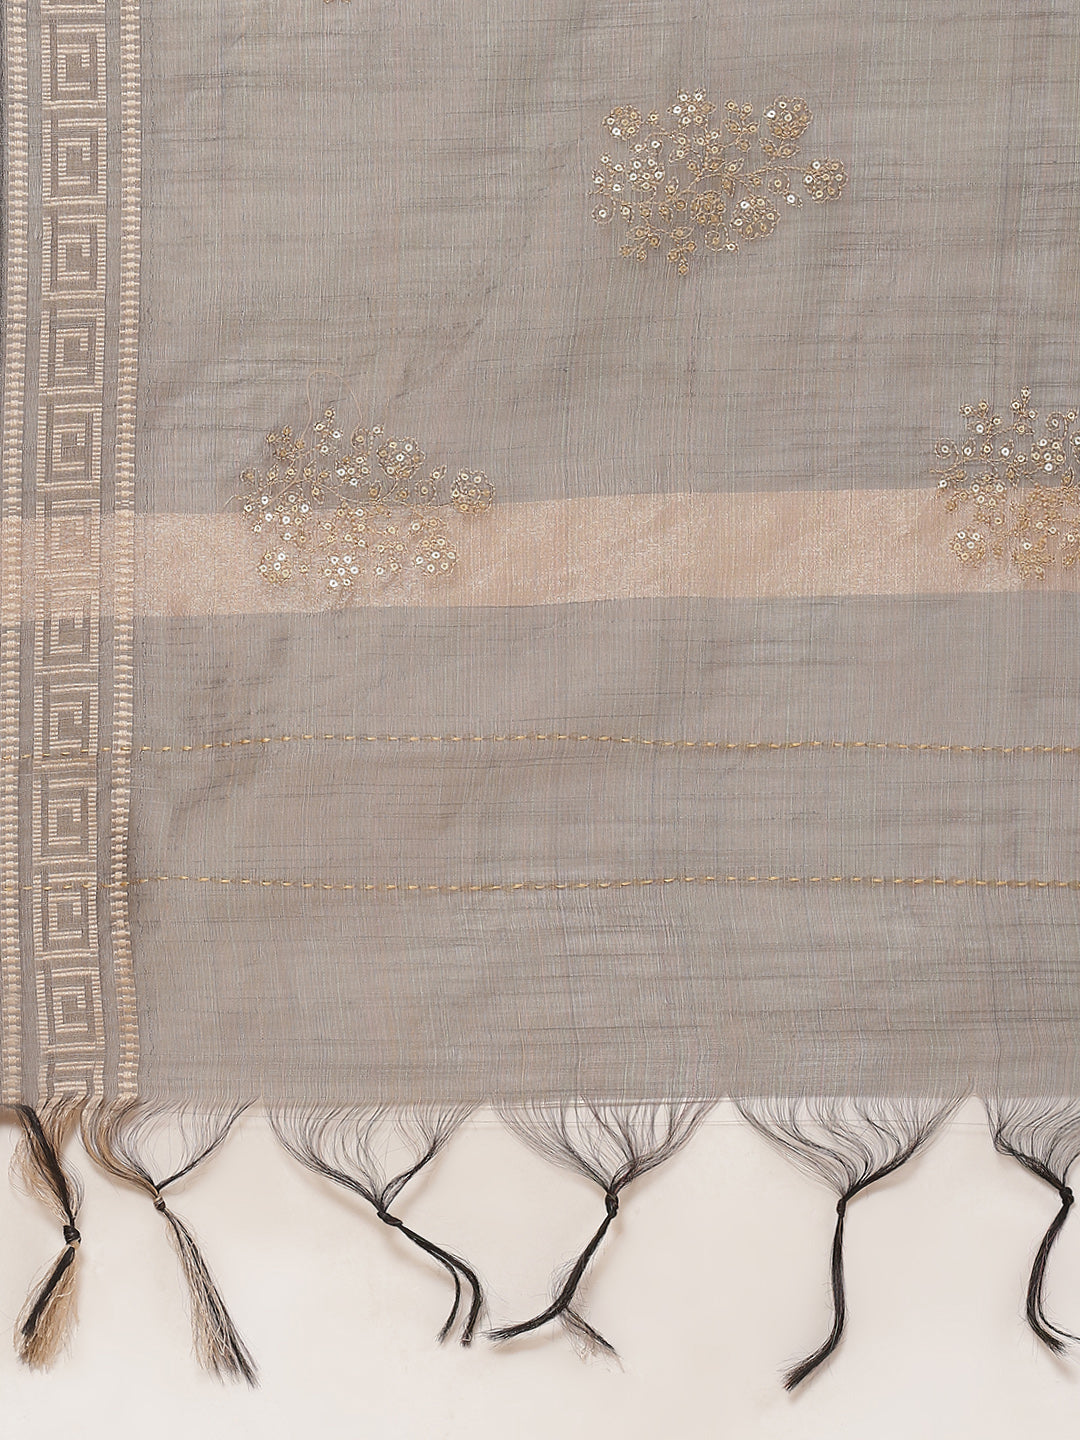 Embroidered Chanderi Unstitched Suit Piece With Dupatta